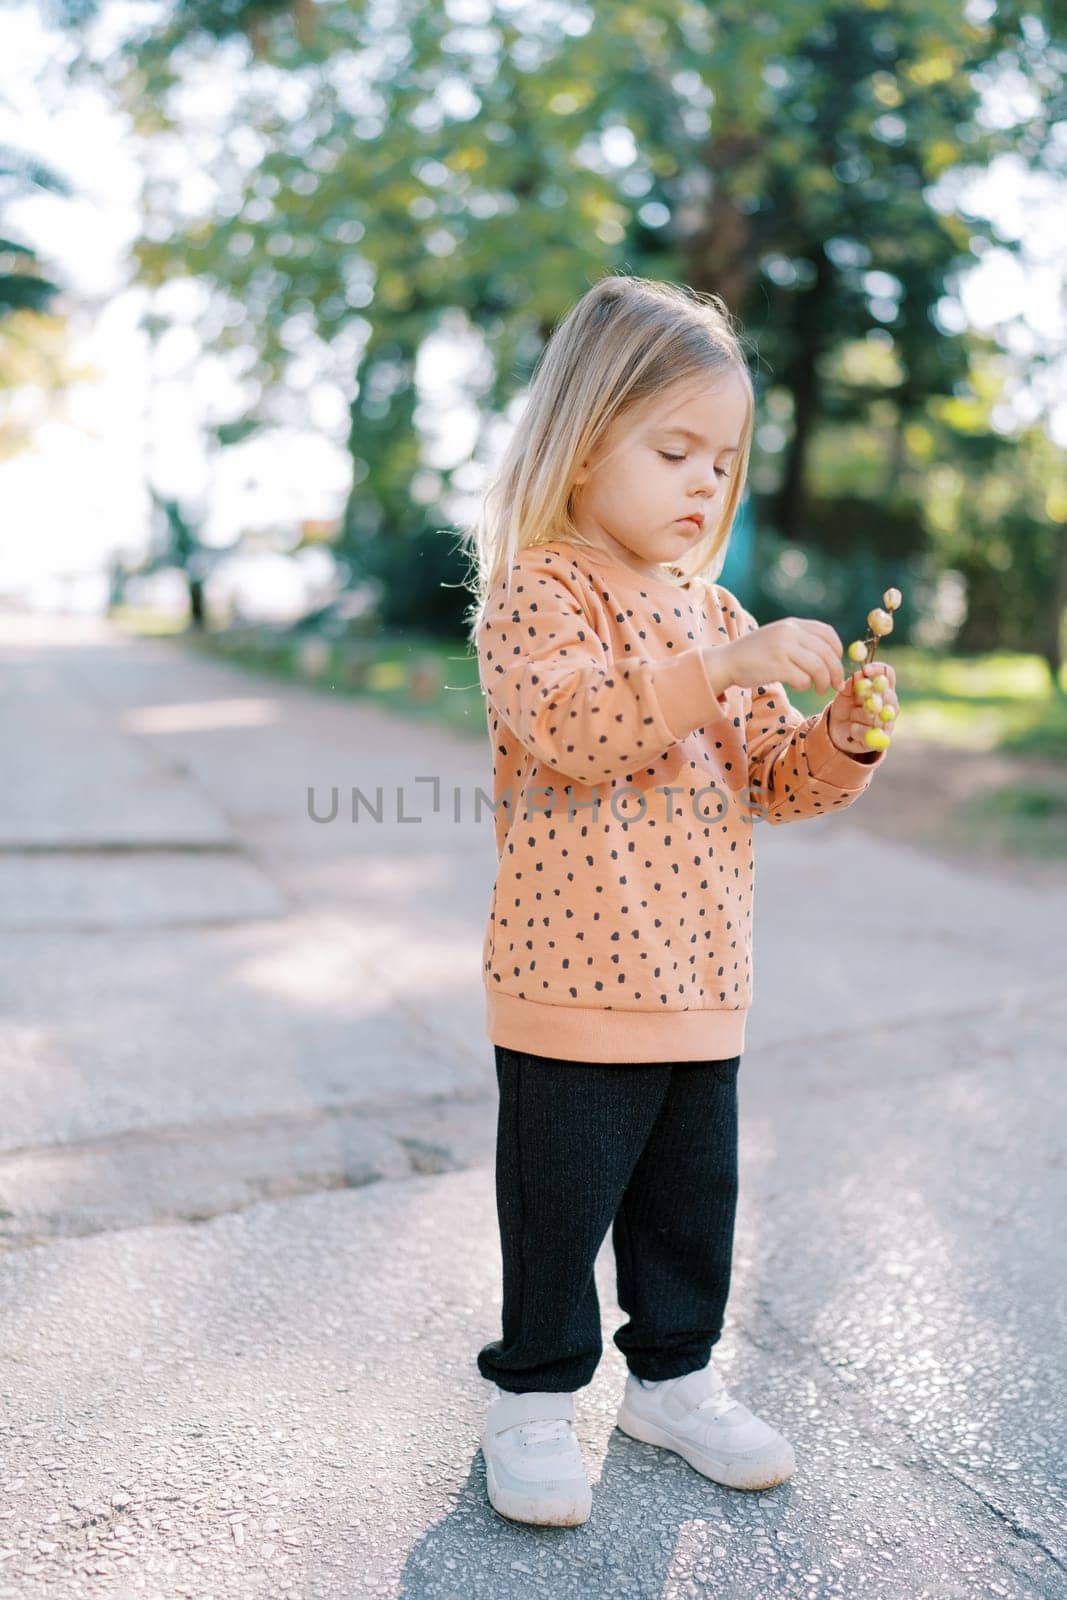 Little girl looks at yellow wildflowers in her hand while standing on the road in a green garden. High quality photo